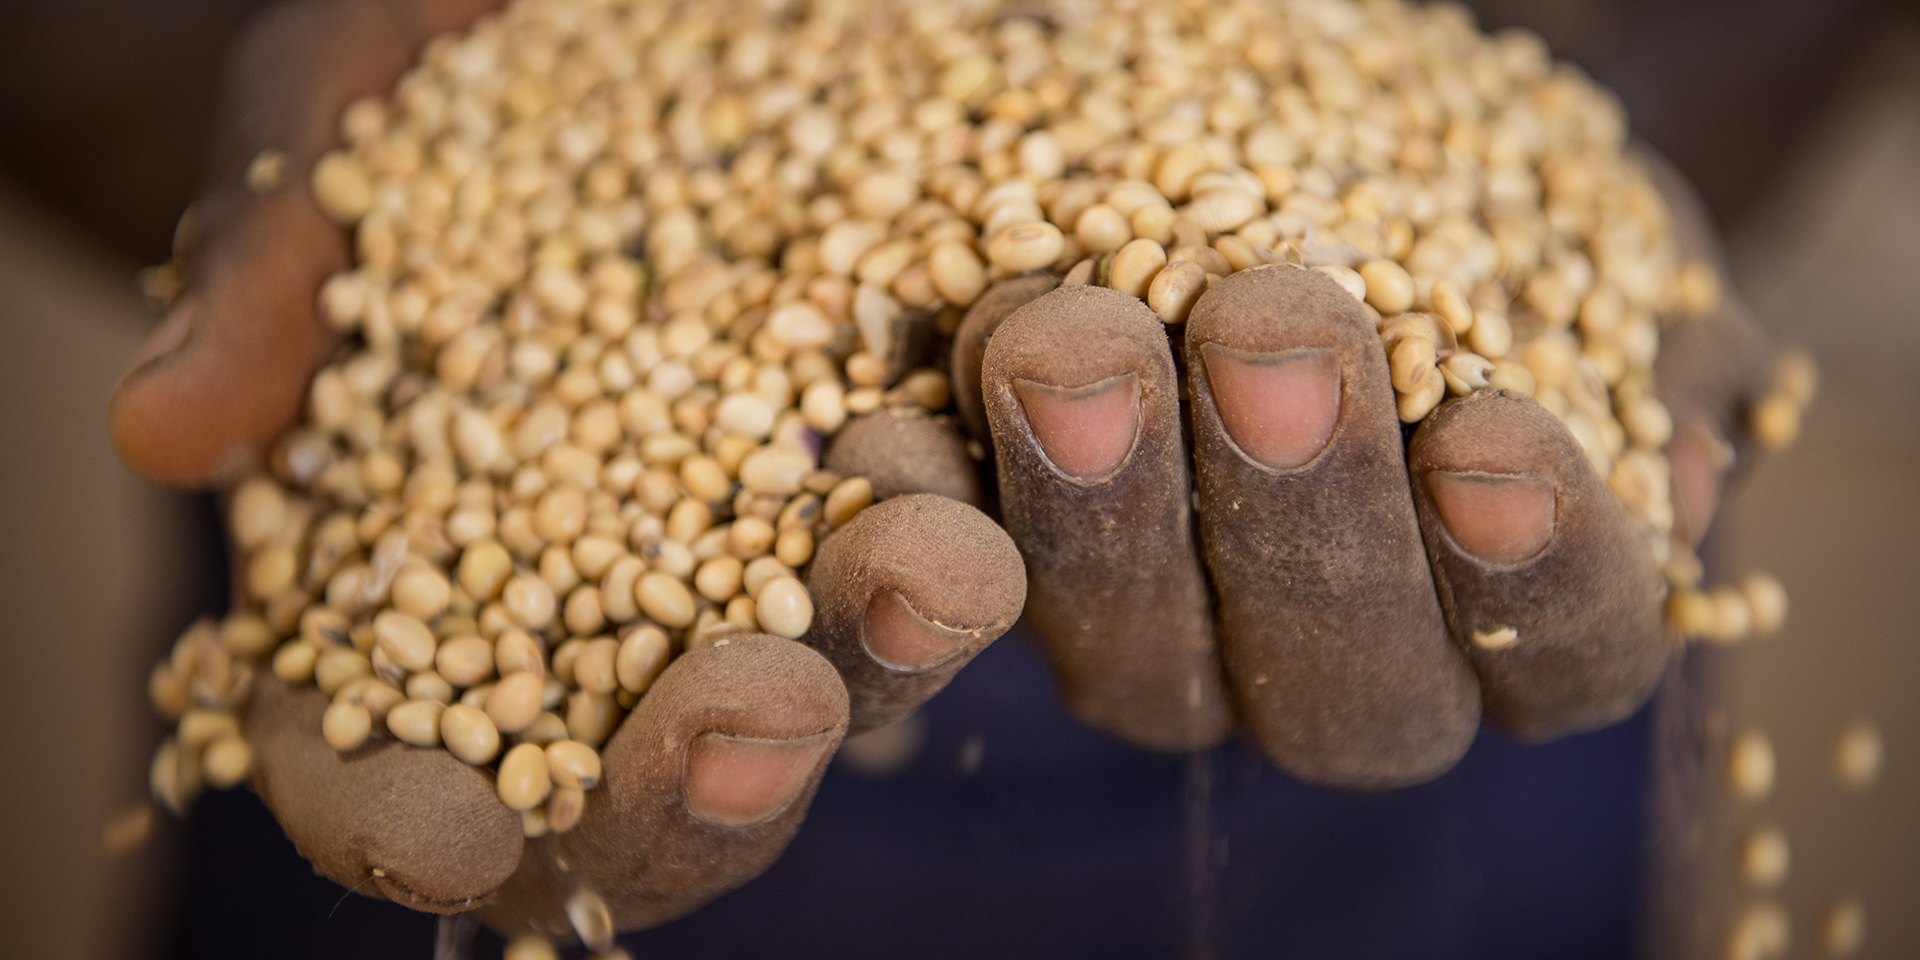 A close-up of hands holding a large pile of beans.